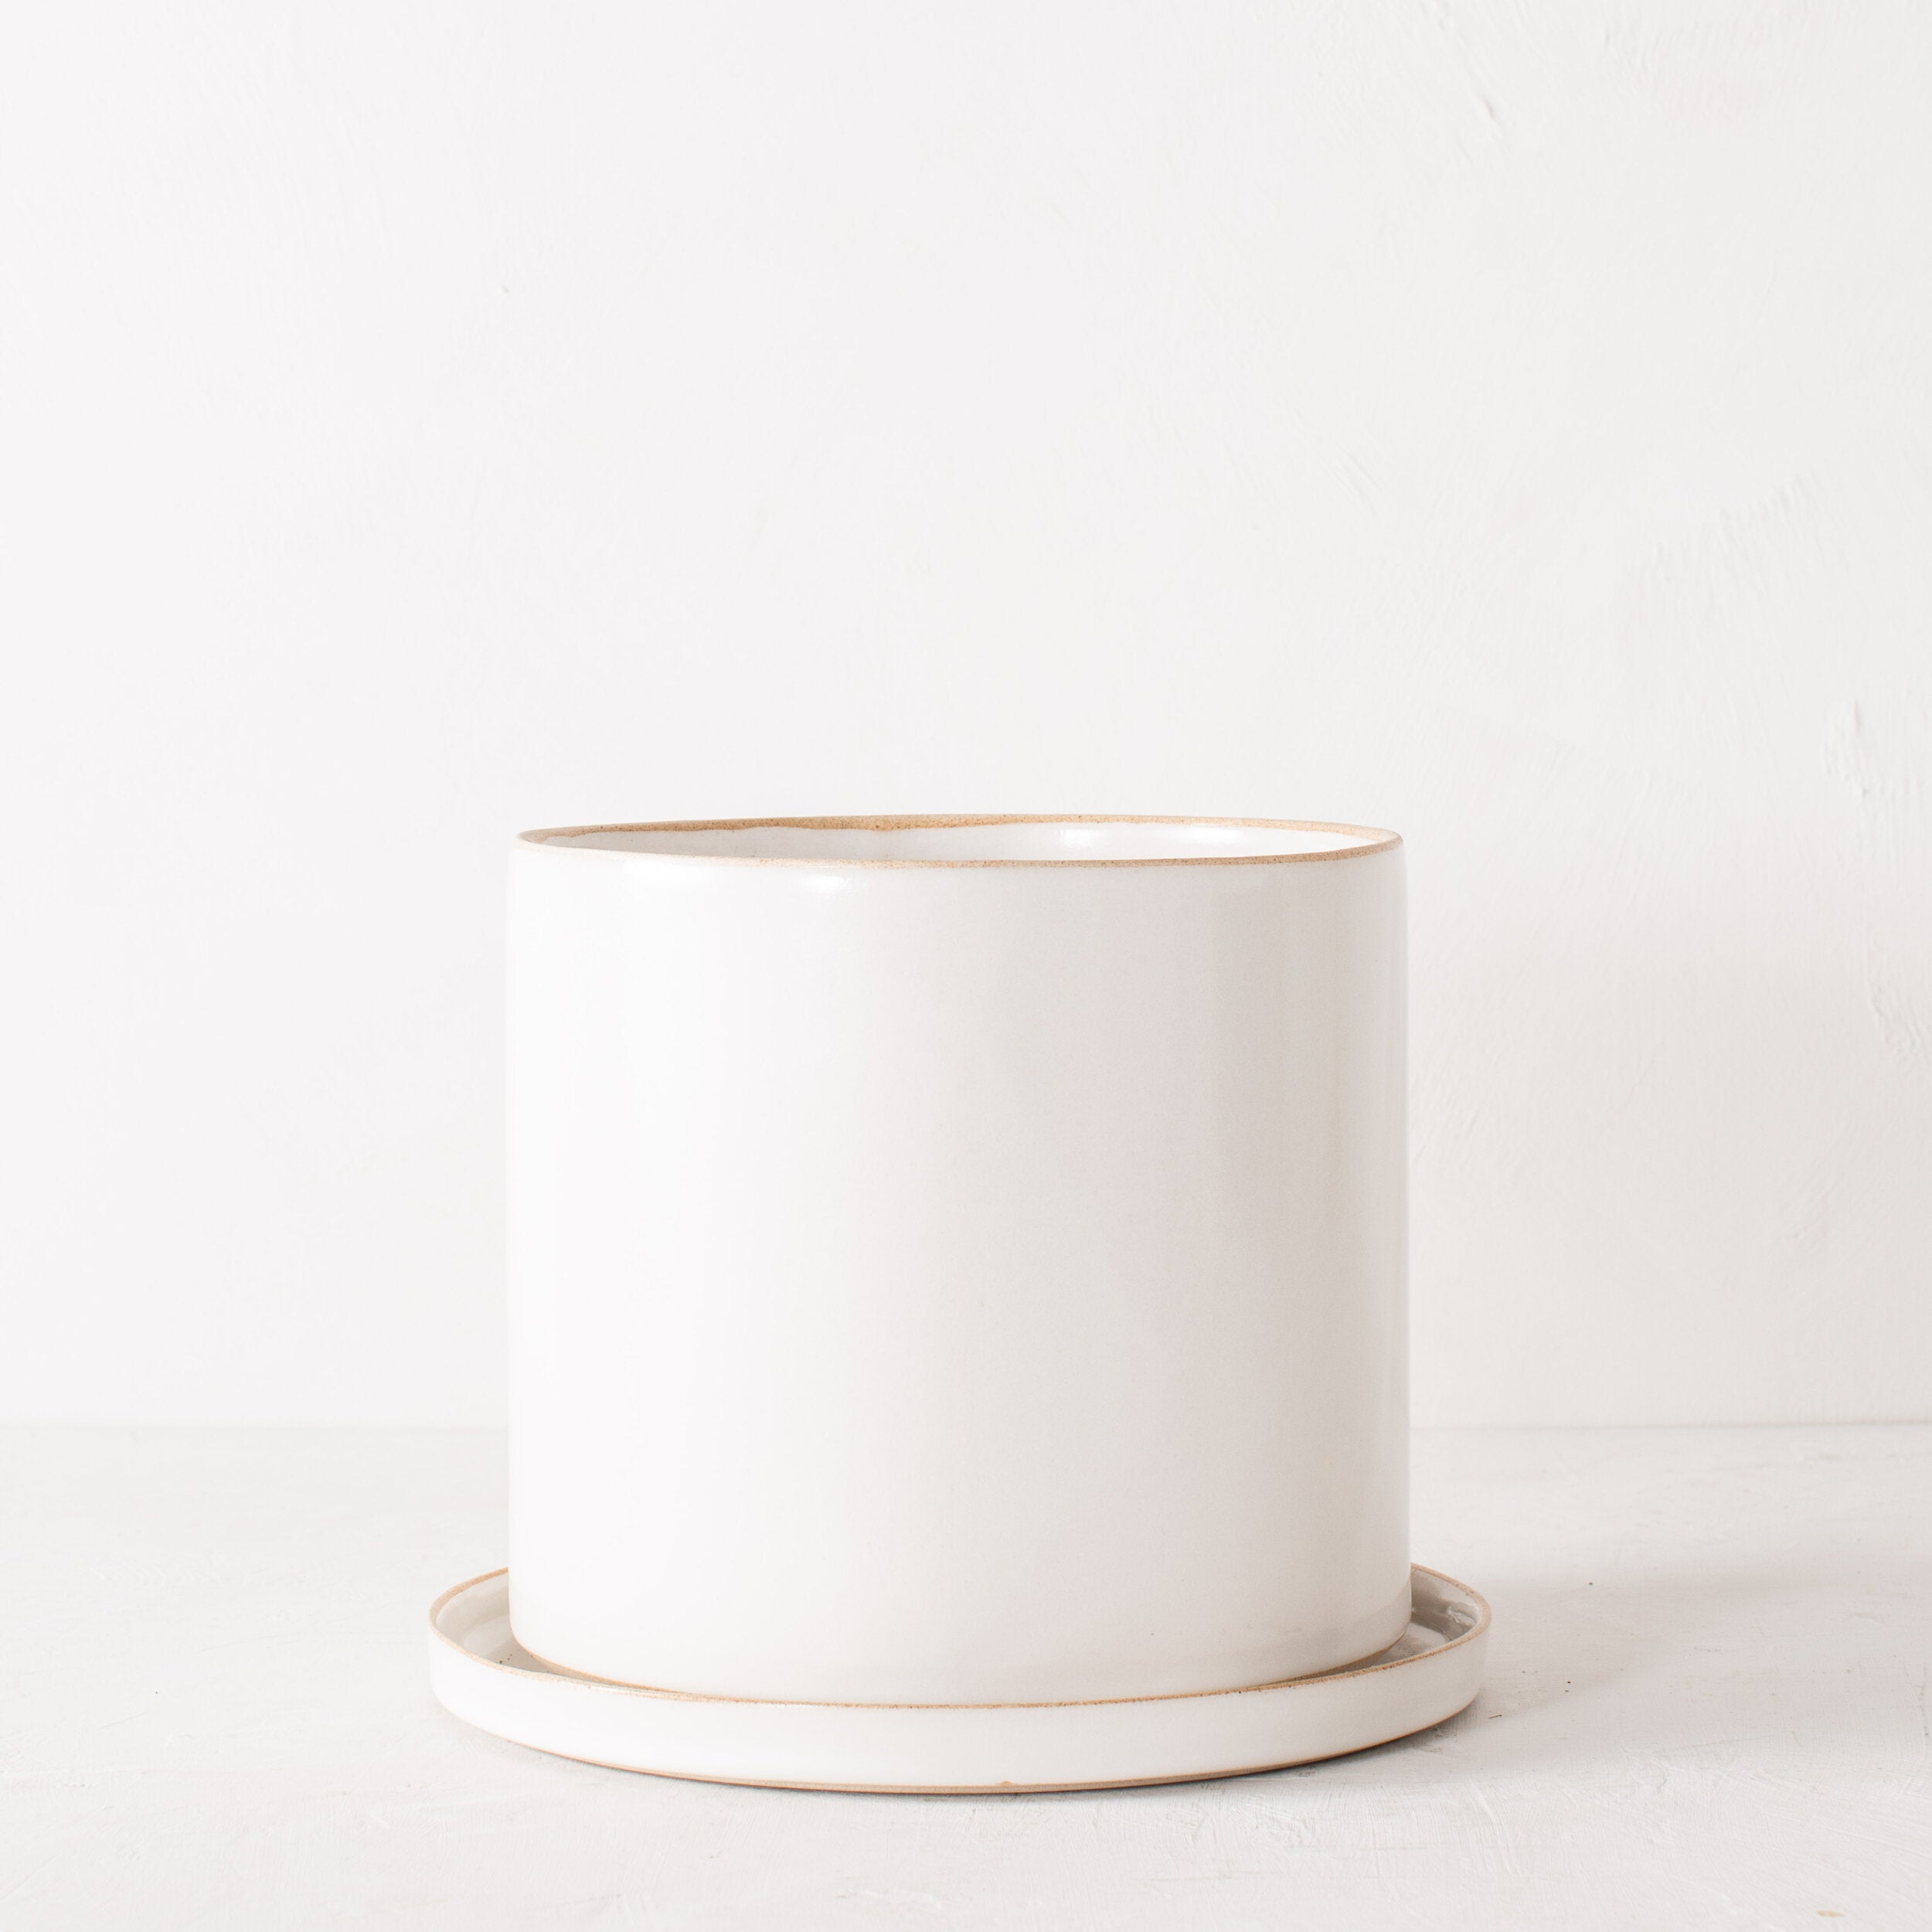 10 inch white ceramic planter with a bottom drainage dish. Staged on a white plaster textured tabletop against a plaster textured white wall. Designed and sold by Convivial Production, Kansas City Ceramics.  Edit alt text